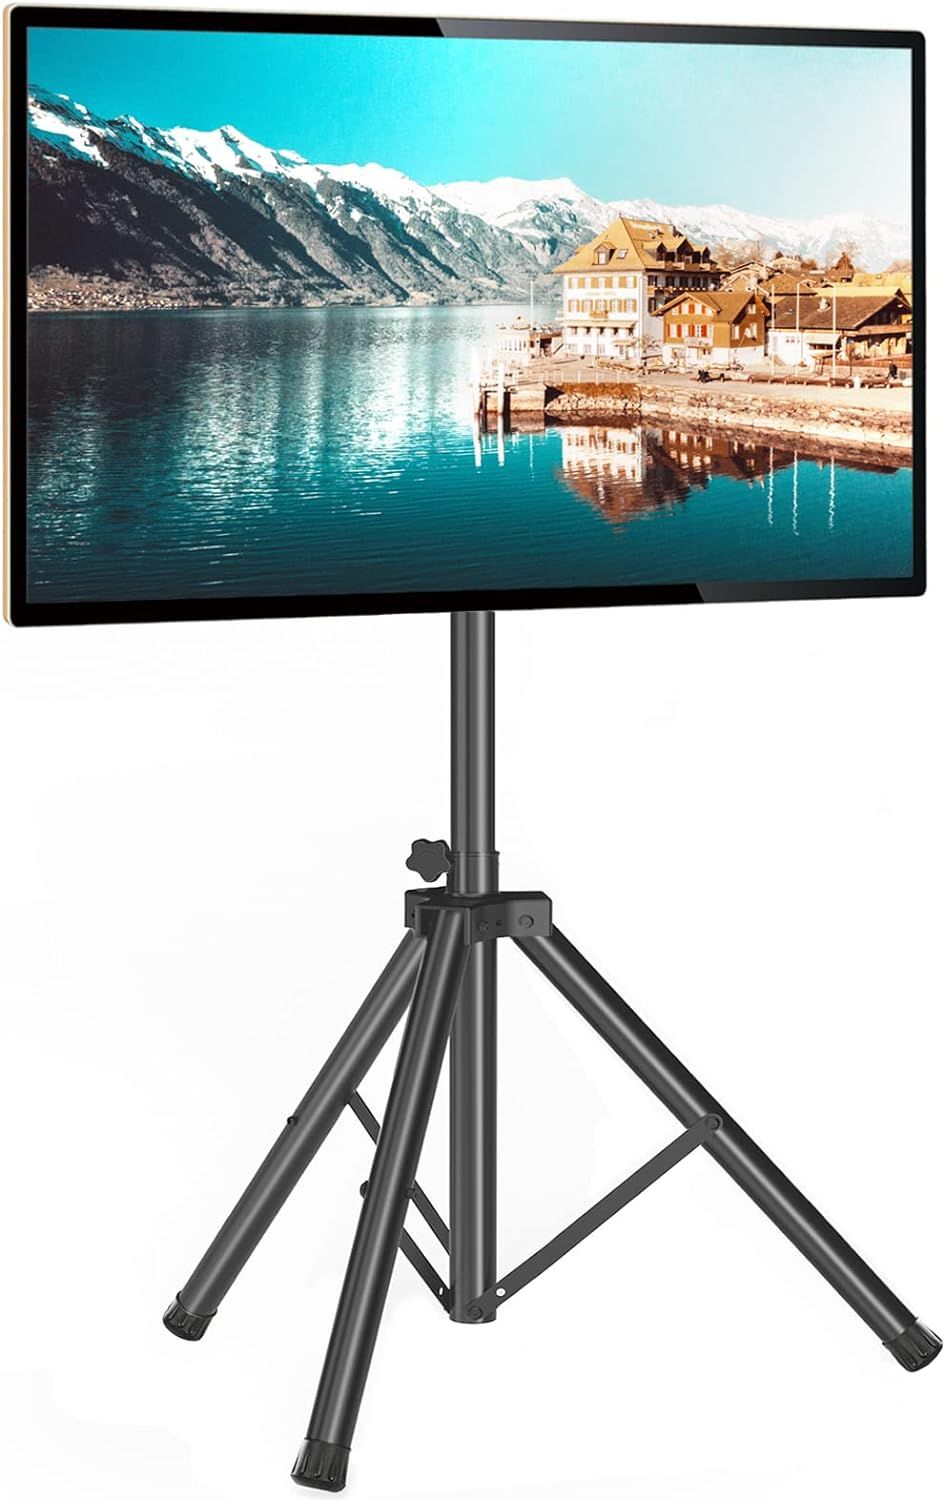 Portable Tv Tripod Stand Tilt Mount For 32 70 Inch India | Ubuy Inside Foldable Portable Adjustable Tv Stands (Photo 6 of 15)